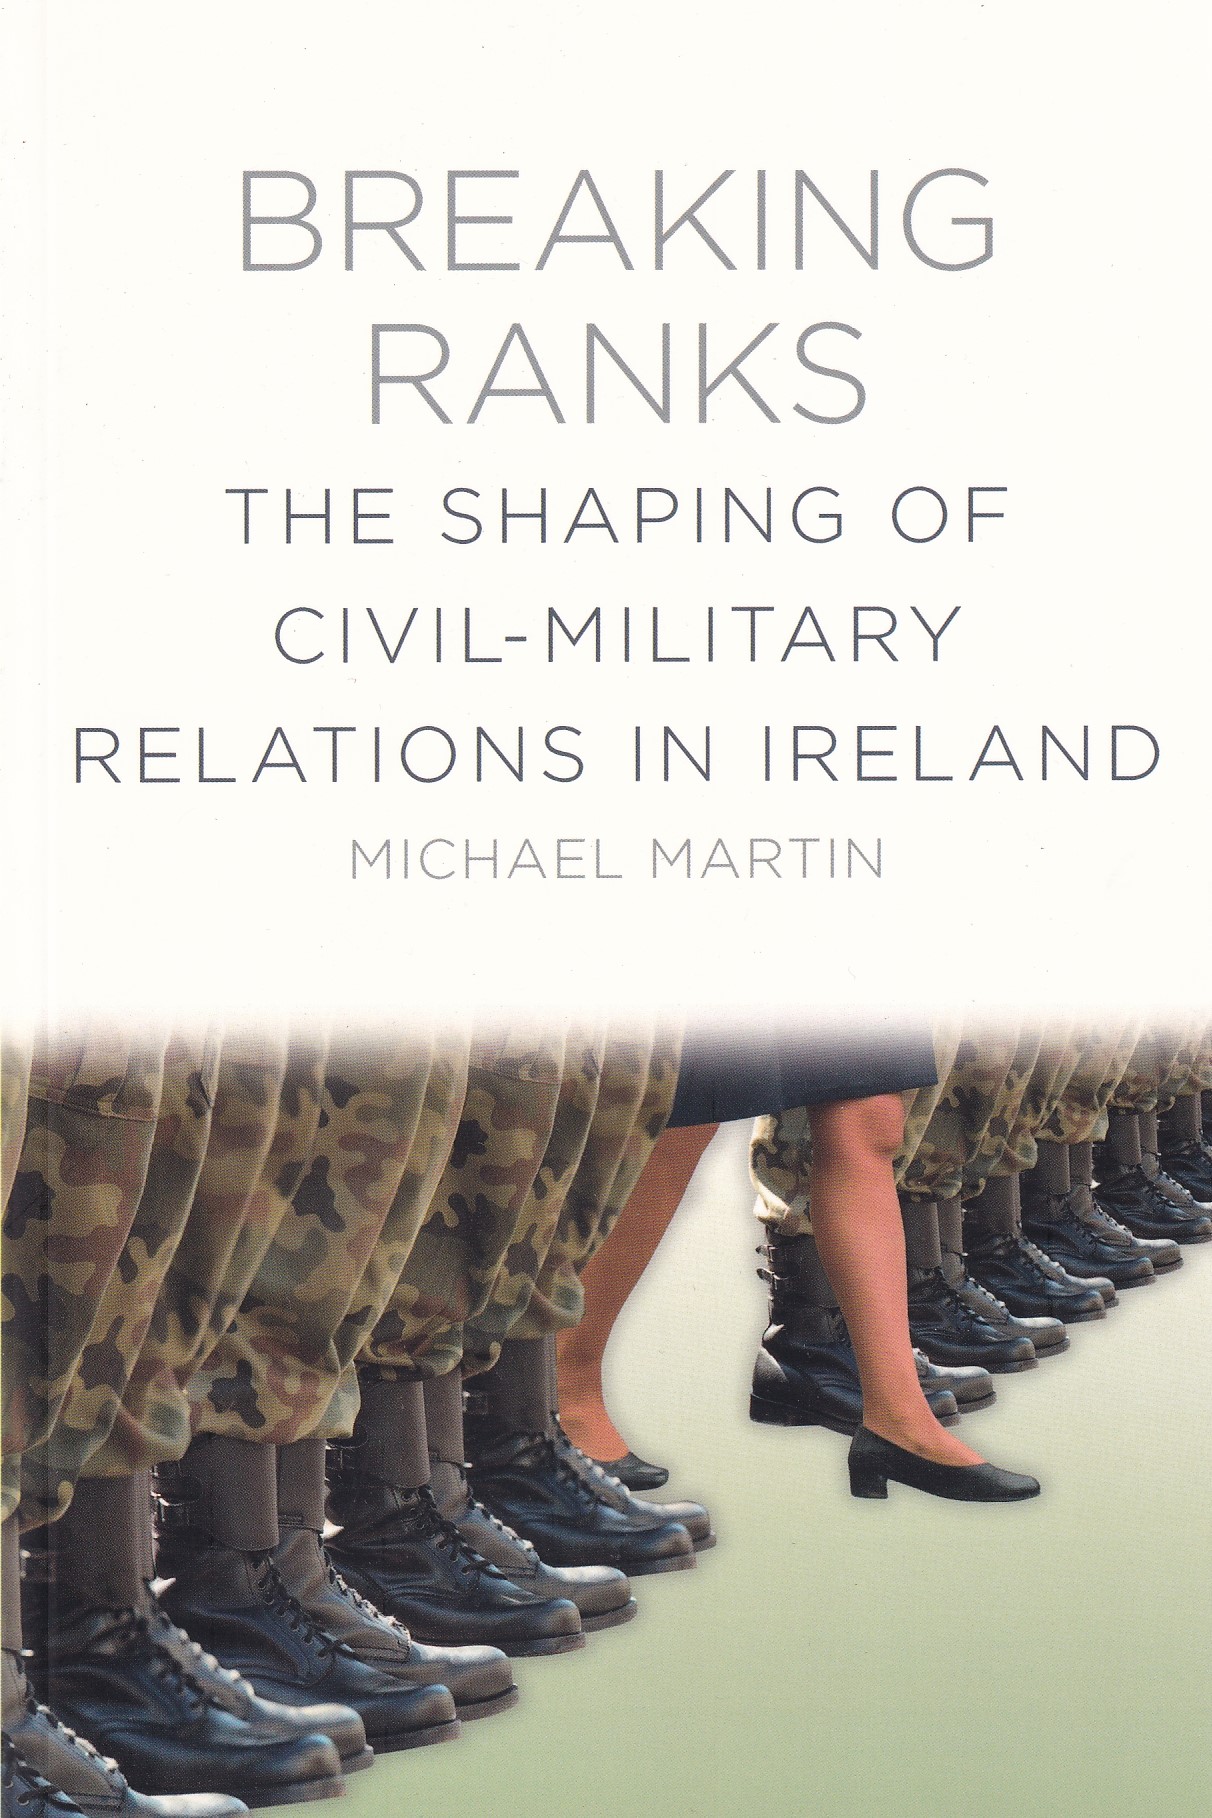 Breaking Ranks: The Shaping of Civil-Military Relations in Ireland by Michael Martin